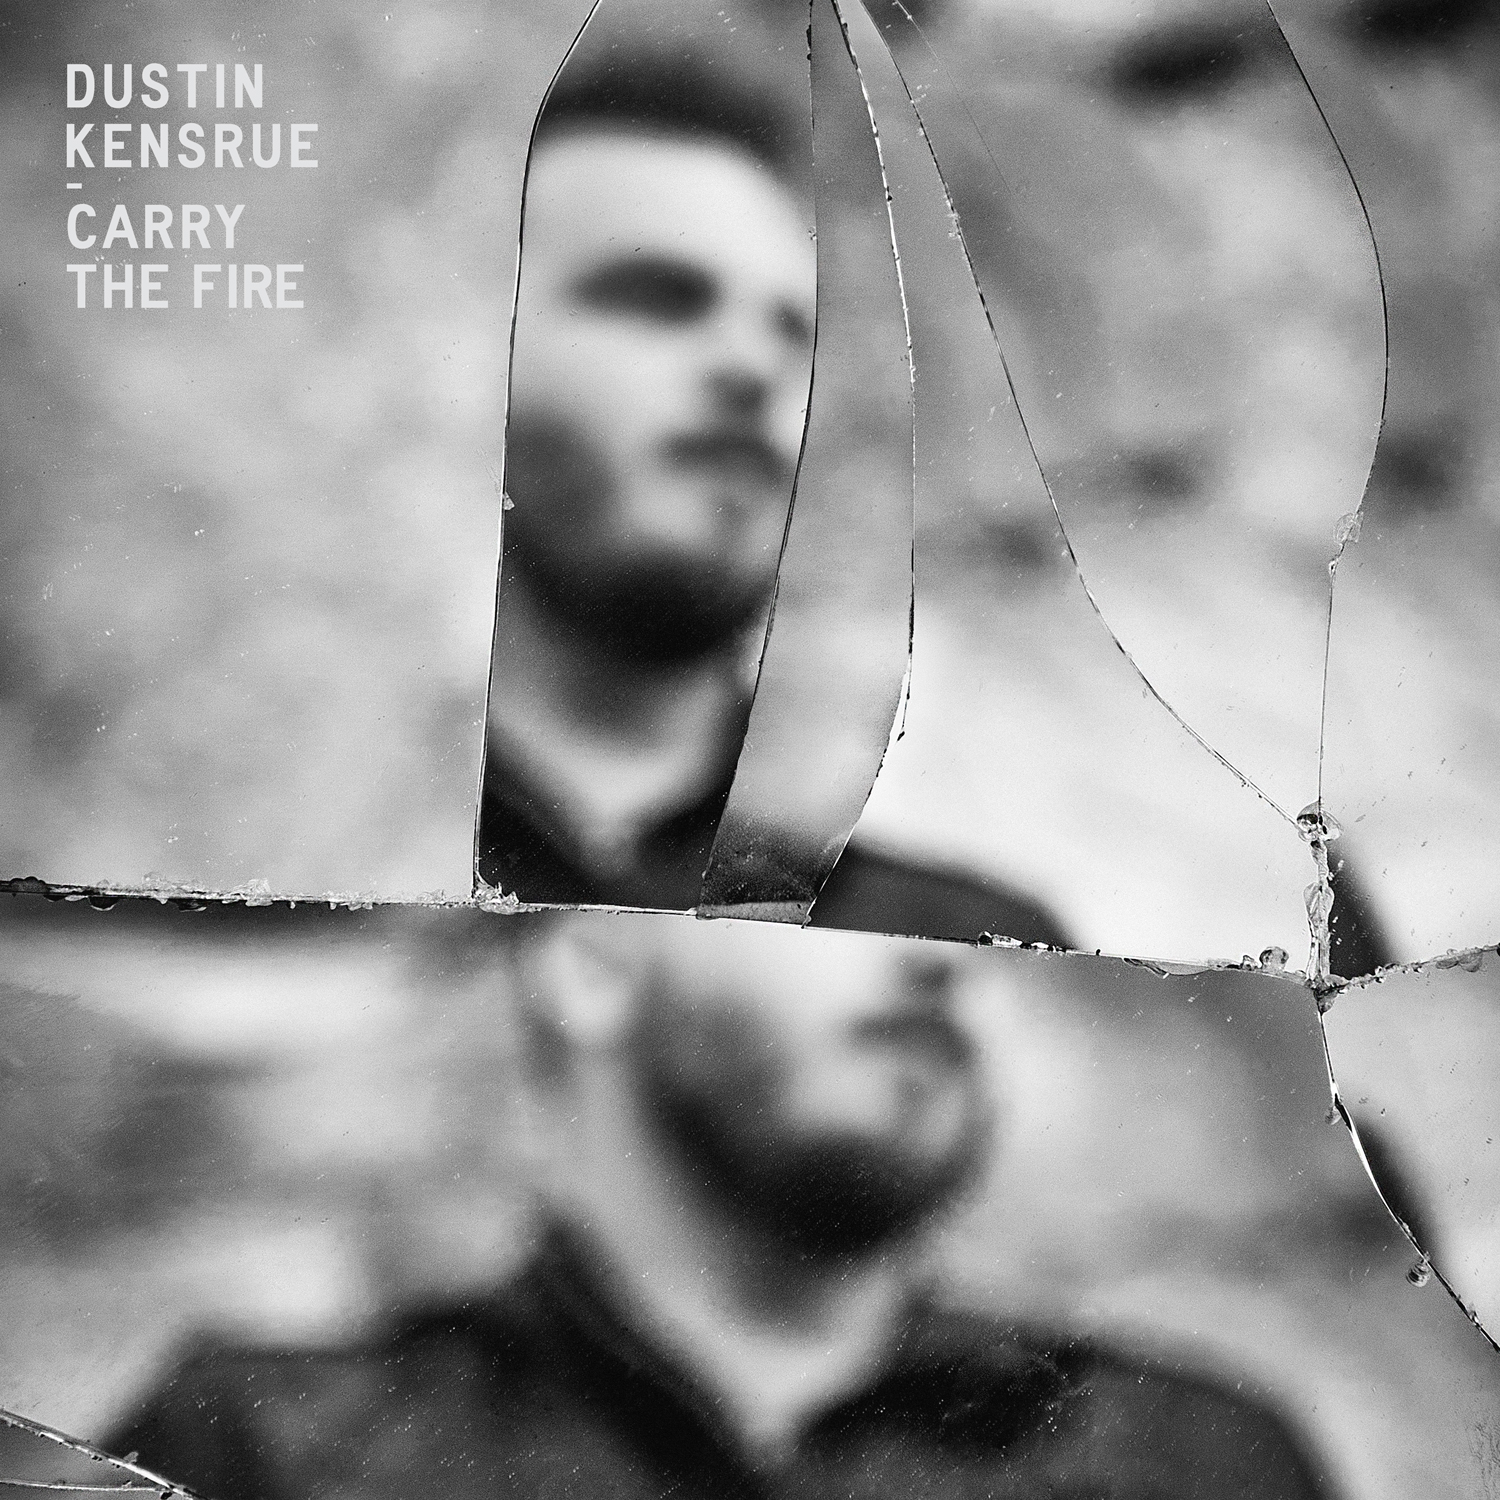 Dustin Kensure Carry the Fire